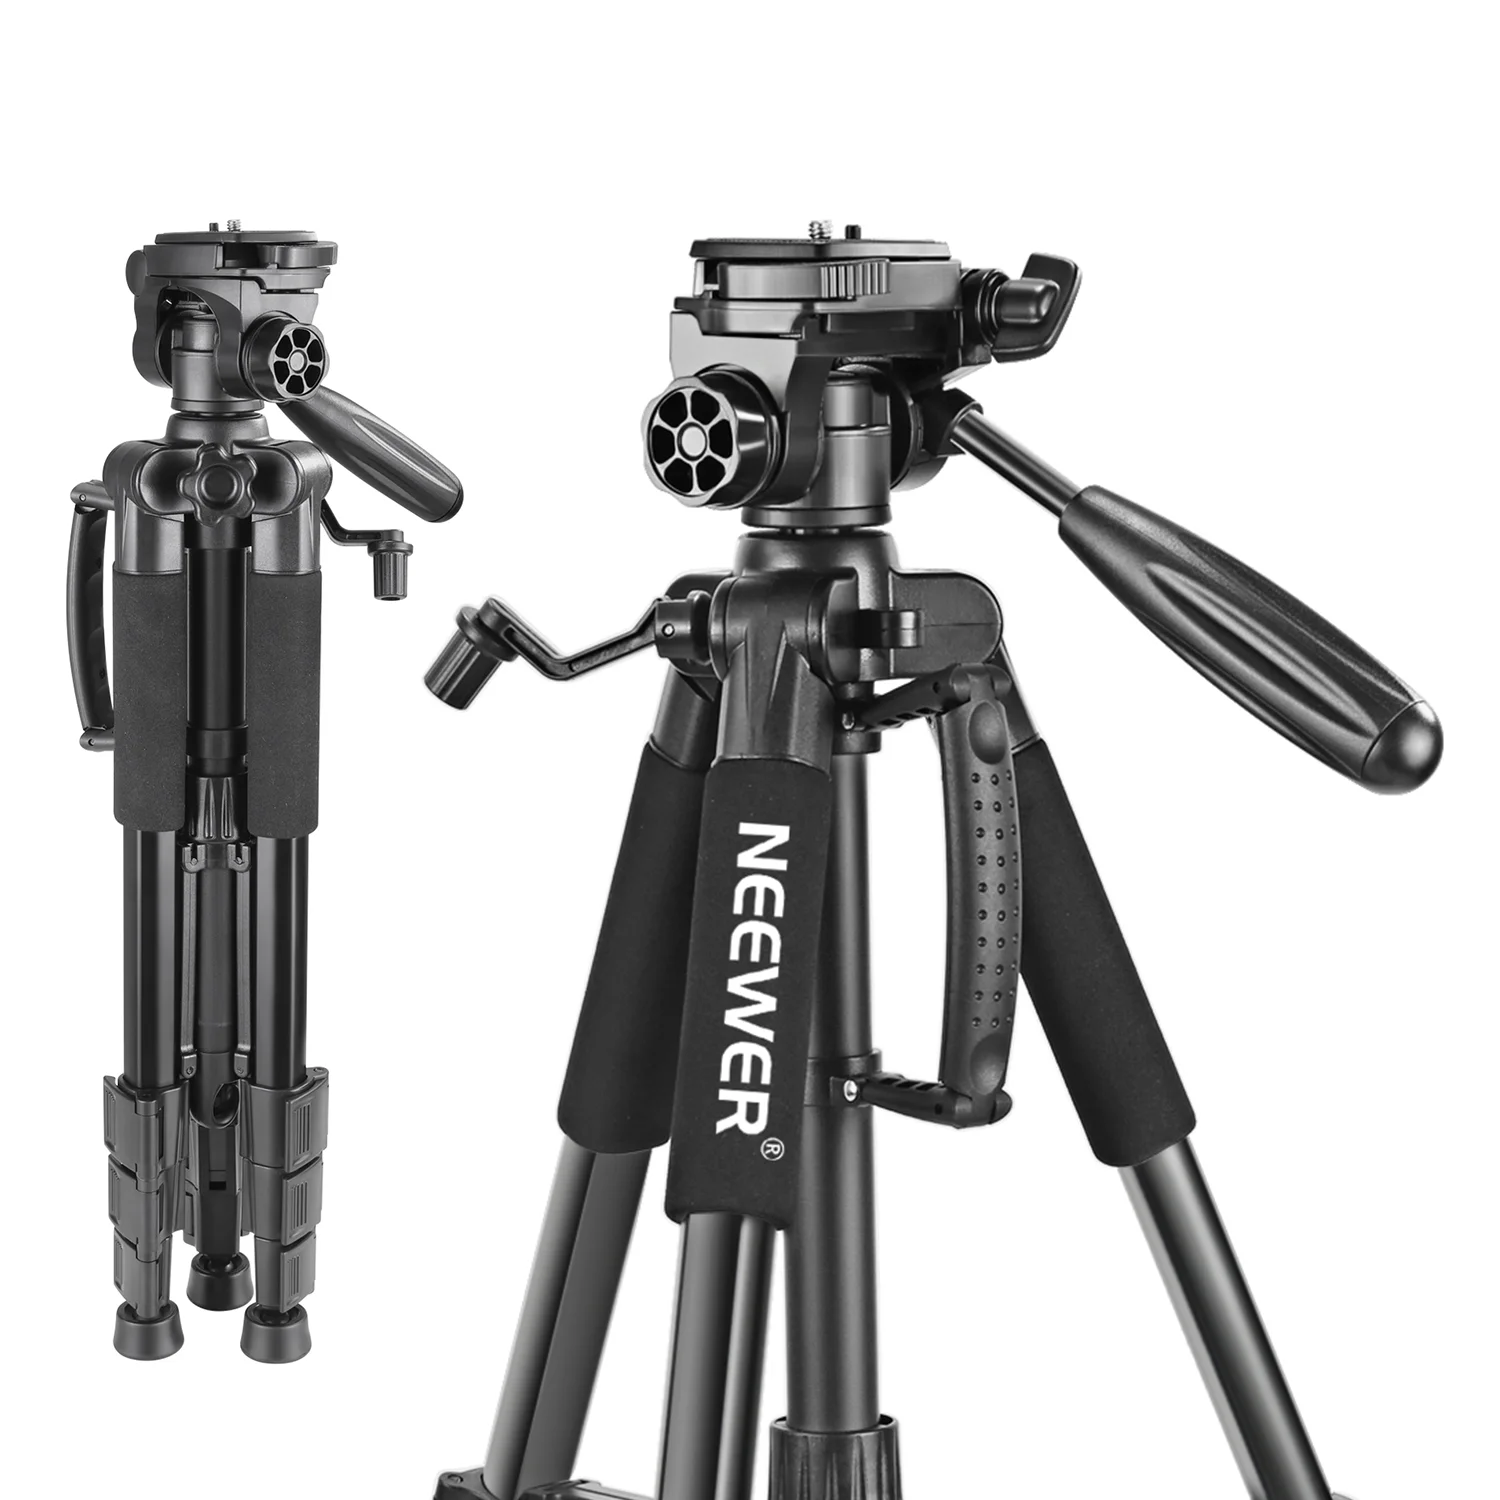 

Neewer Aluminum Camera Tripod And 3-Way Swivel Pan Head,Bag For DSLR Camera,DV Video Camcorder Load Up To 8.8 Pounds/4 Kilograms